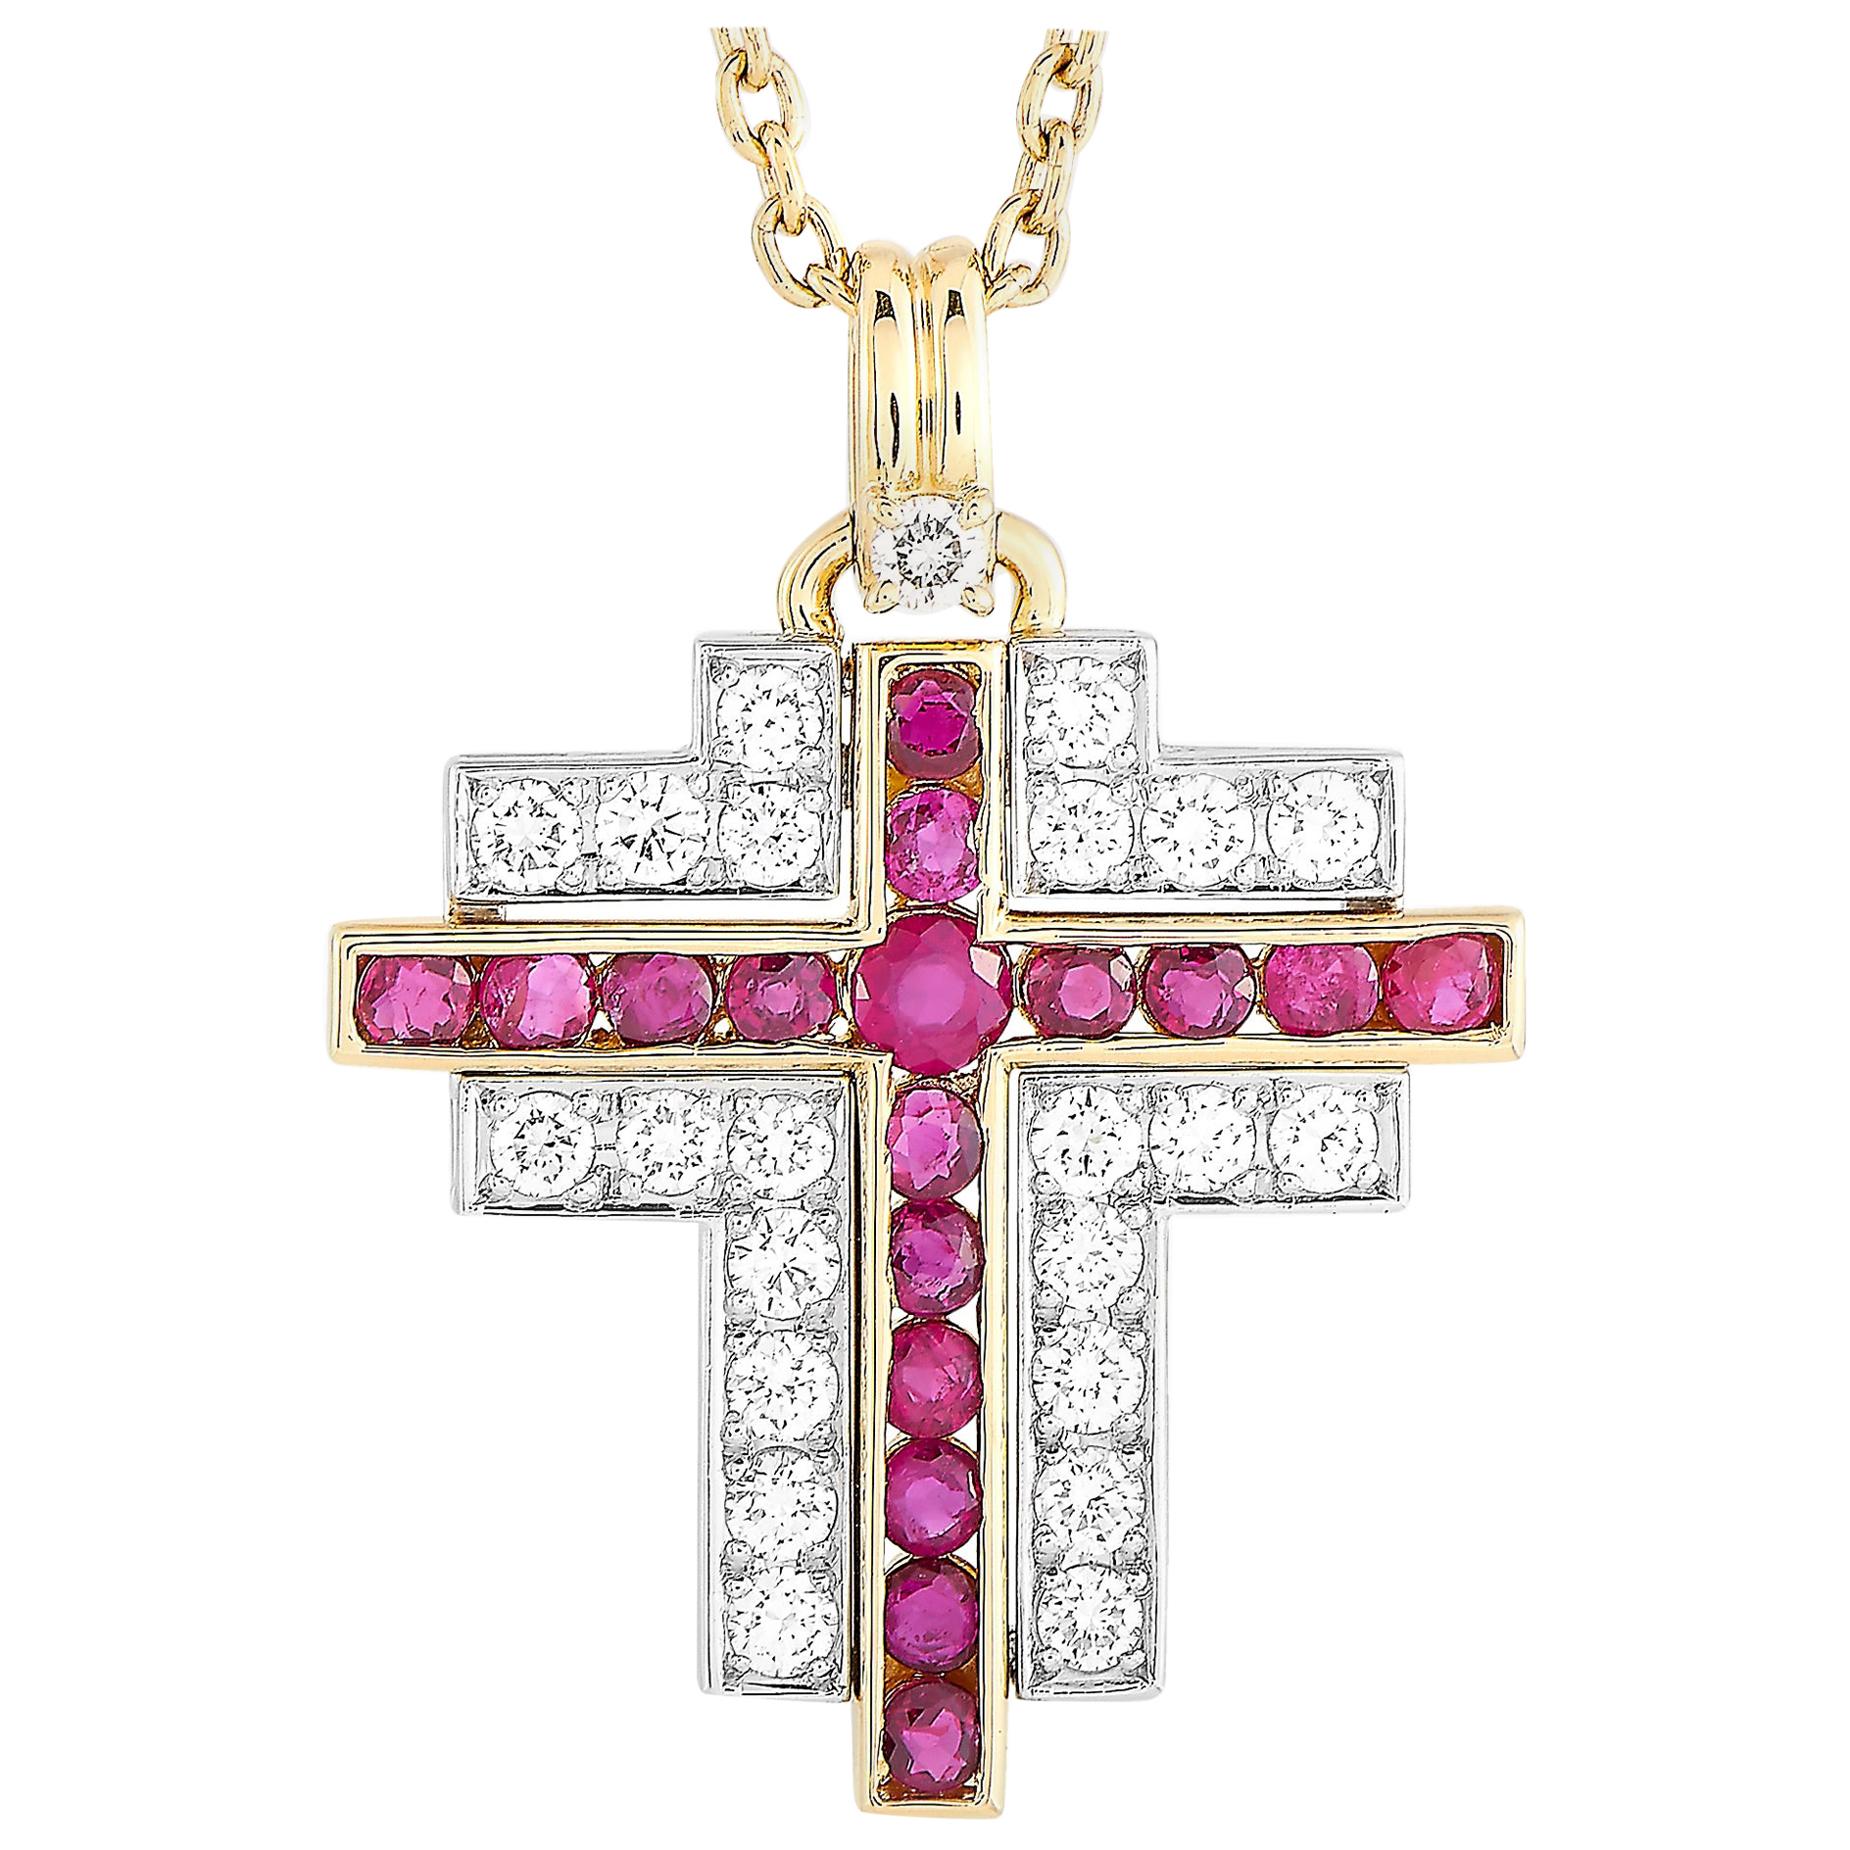 Southern Cross 18K Yellow Gold 1.37 ct Diamond and Ruby Cross Pendant Necklace